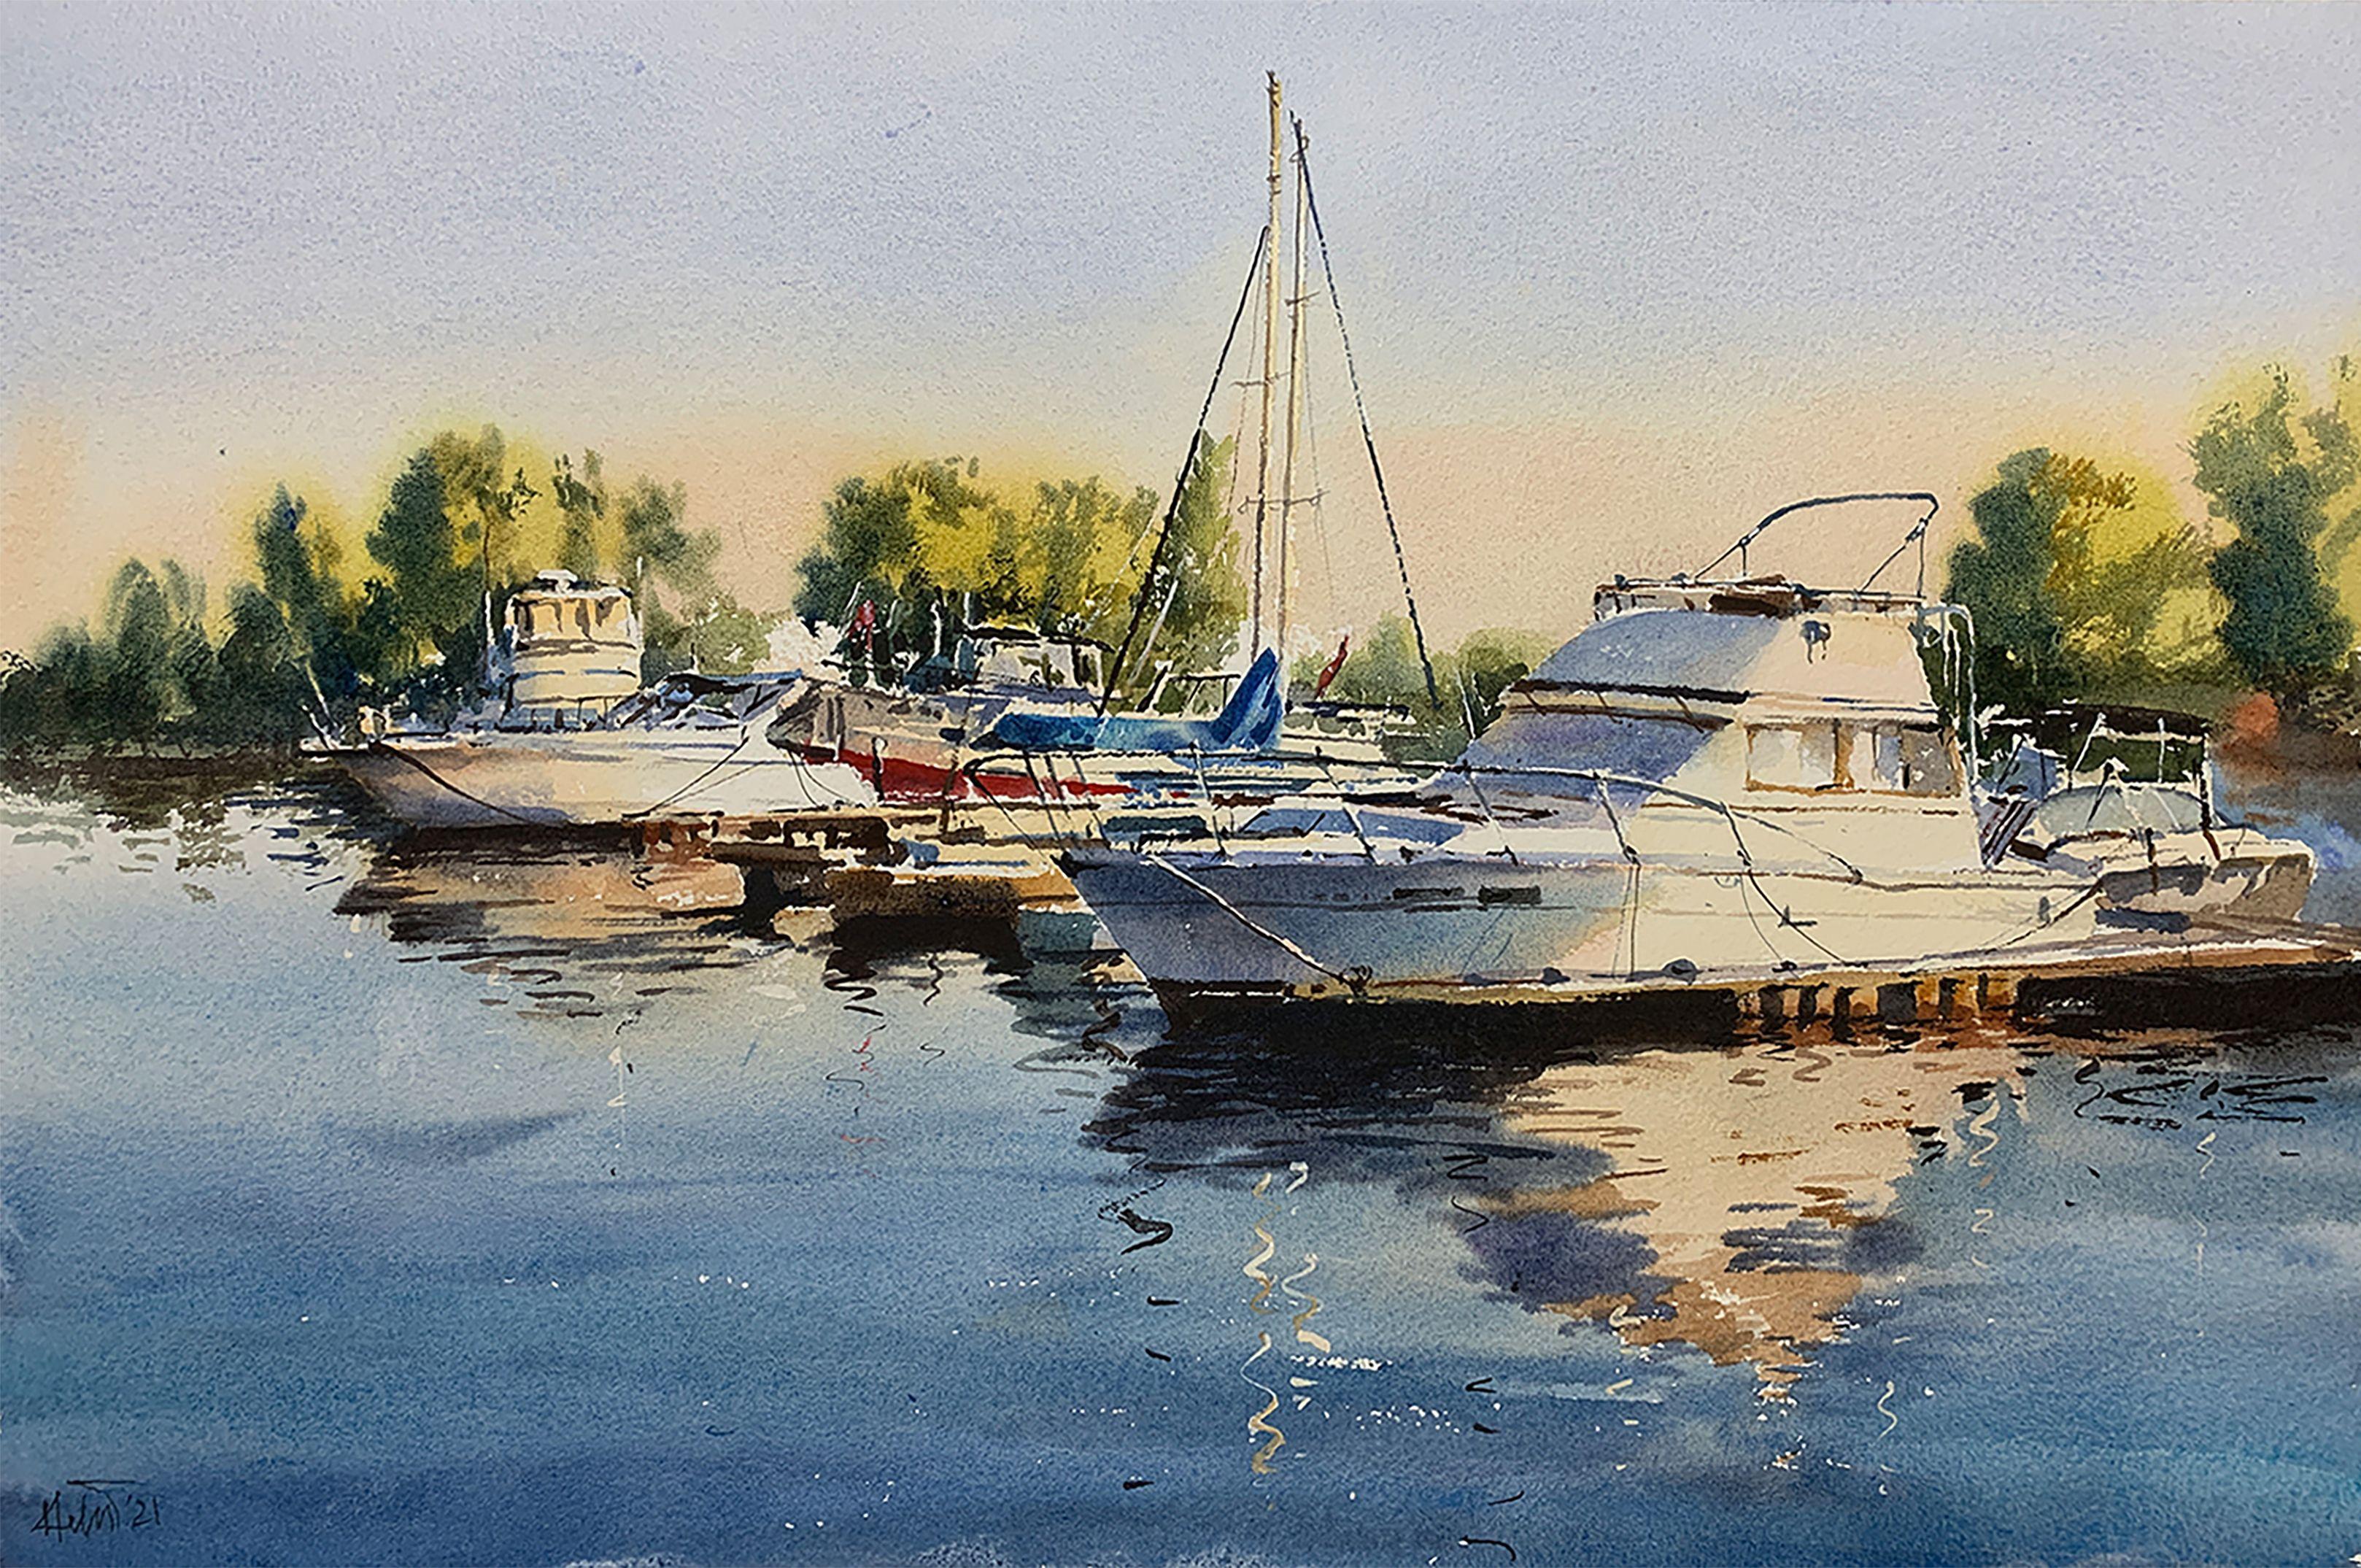 Water and Boat_04, Painting, Watercolor on Watercolor Paper - Art by Helal Uddin